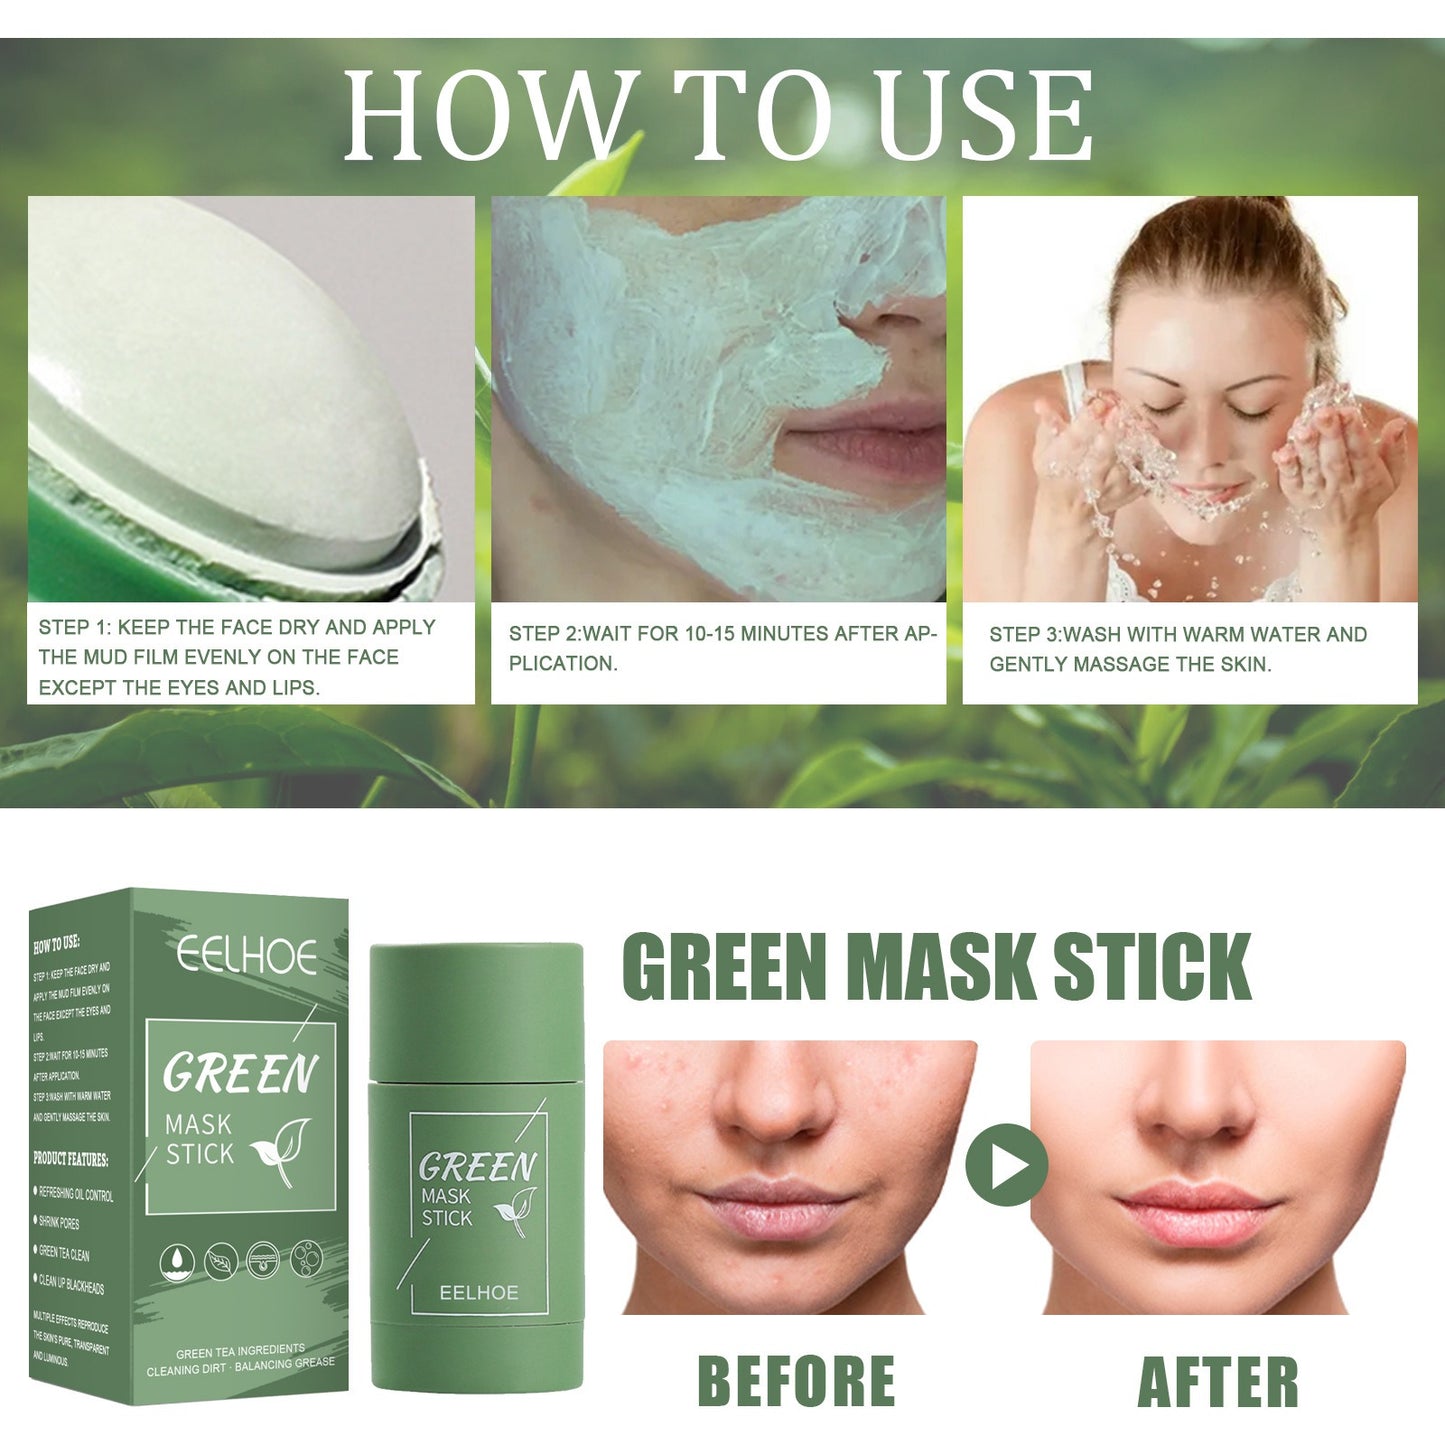 EELHOE Green Tea Deep Cleansing And Hydrating Mask